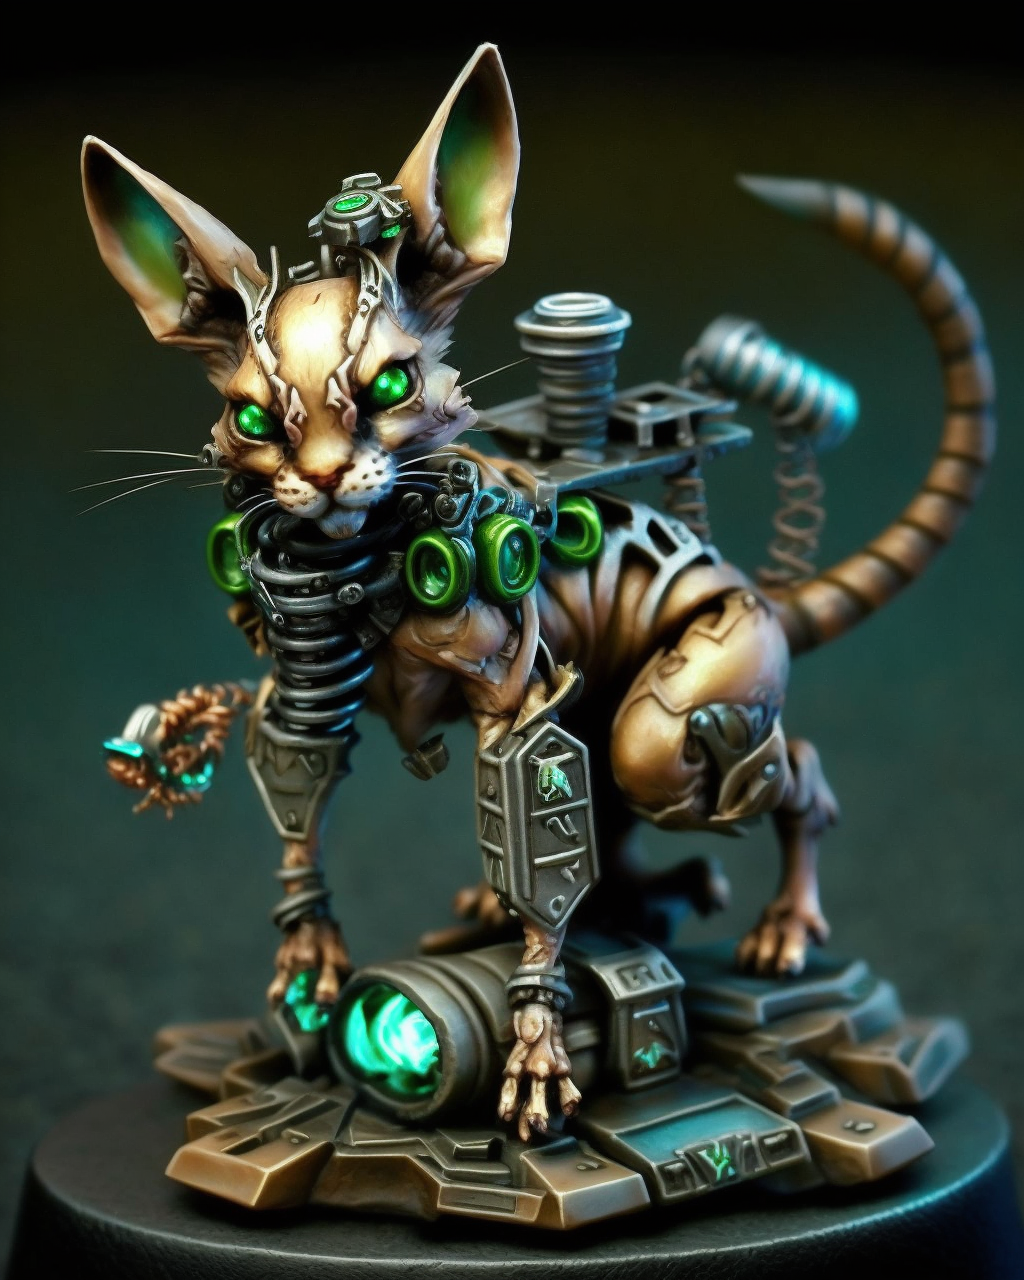 angry cat hiss by FutureRender on DeviantArt